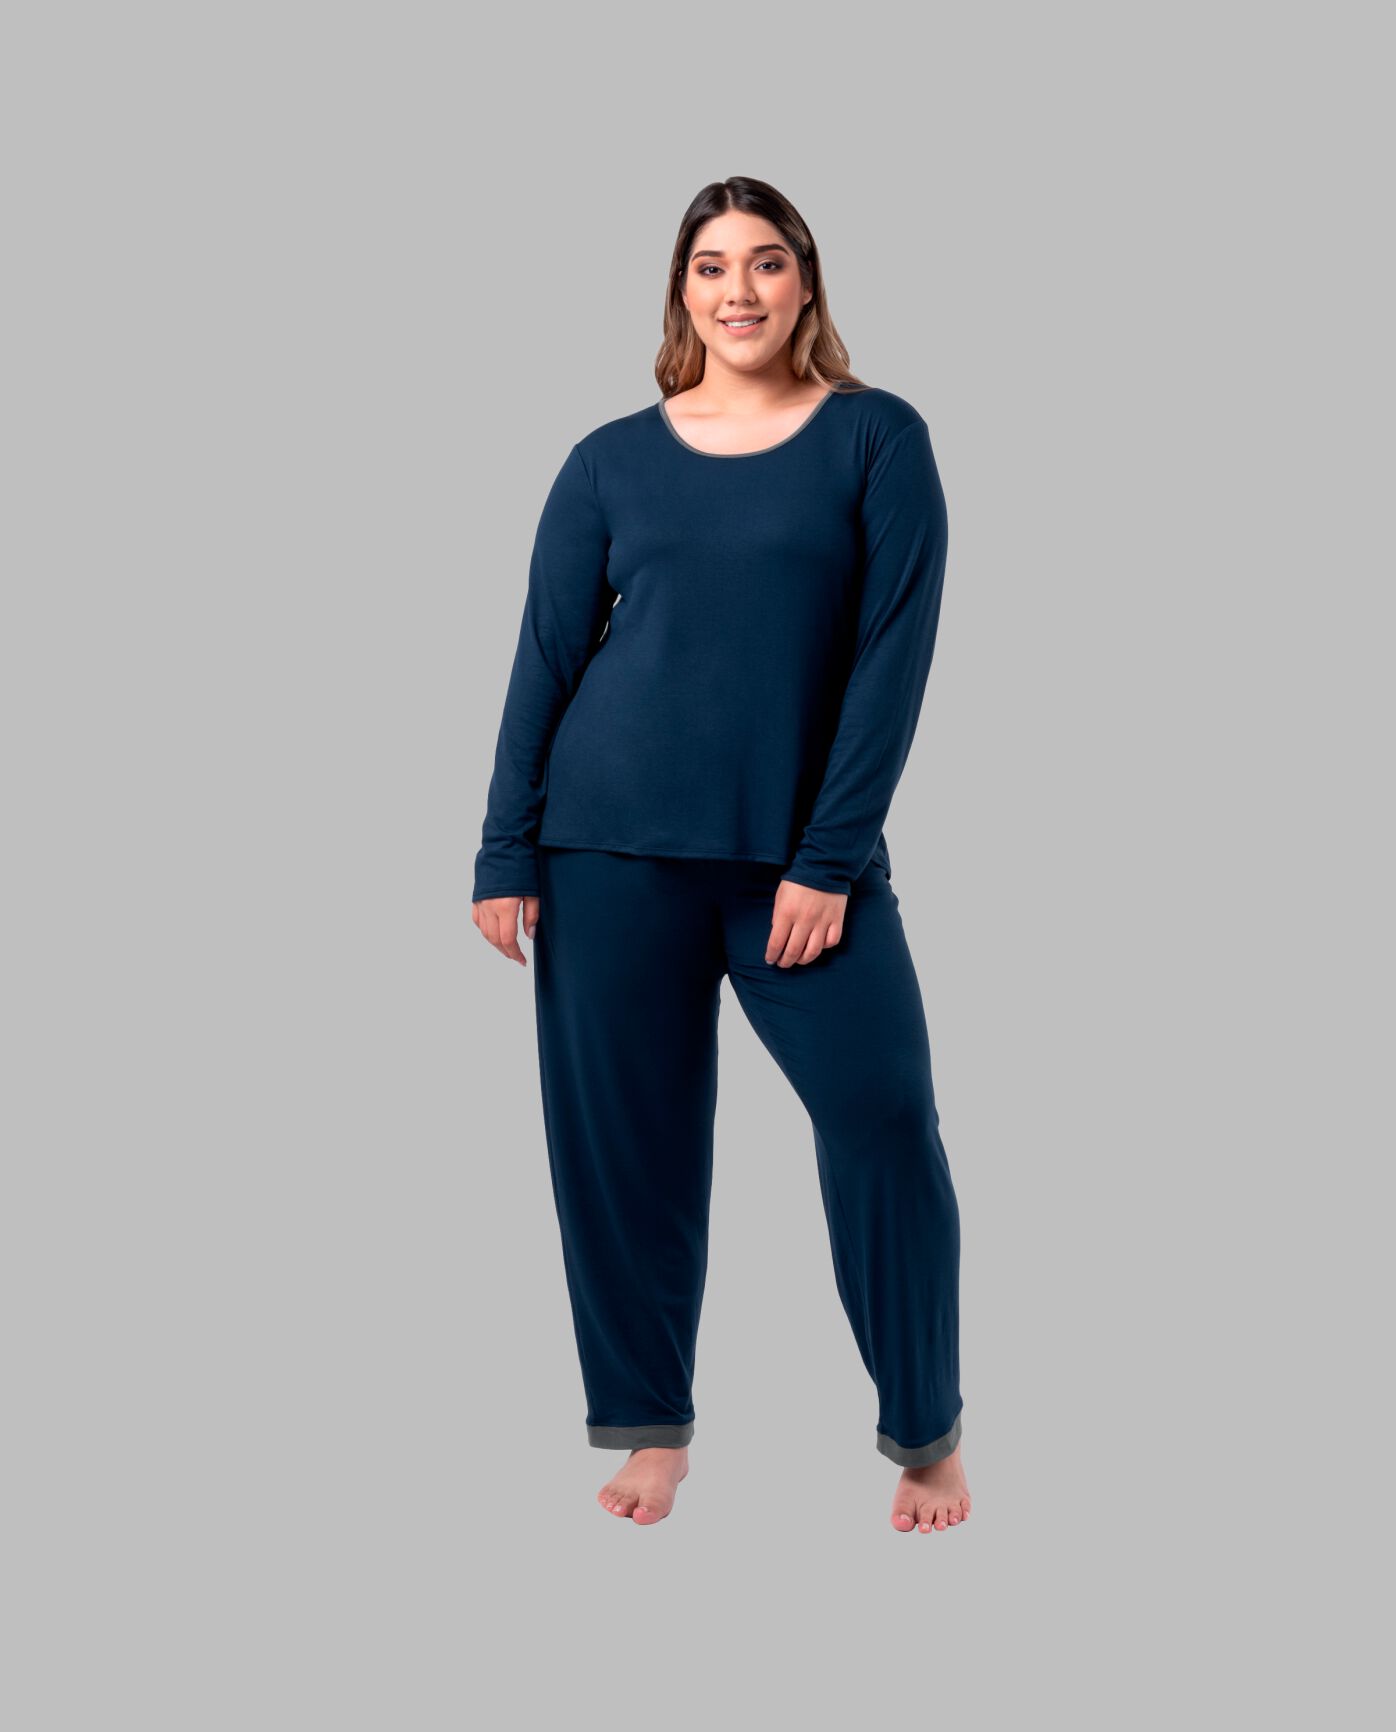 Women's Plus Fit for Me® Soft & Breathable Crew Neck Long Sleeve Shirt and Pants, 2 Piece Pajama Set MIDNIGHT BLUE